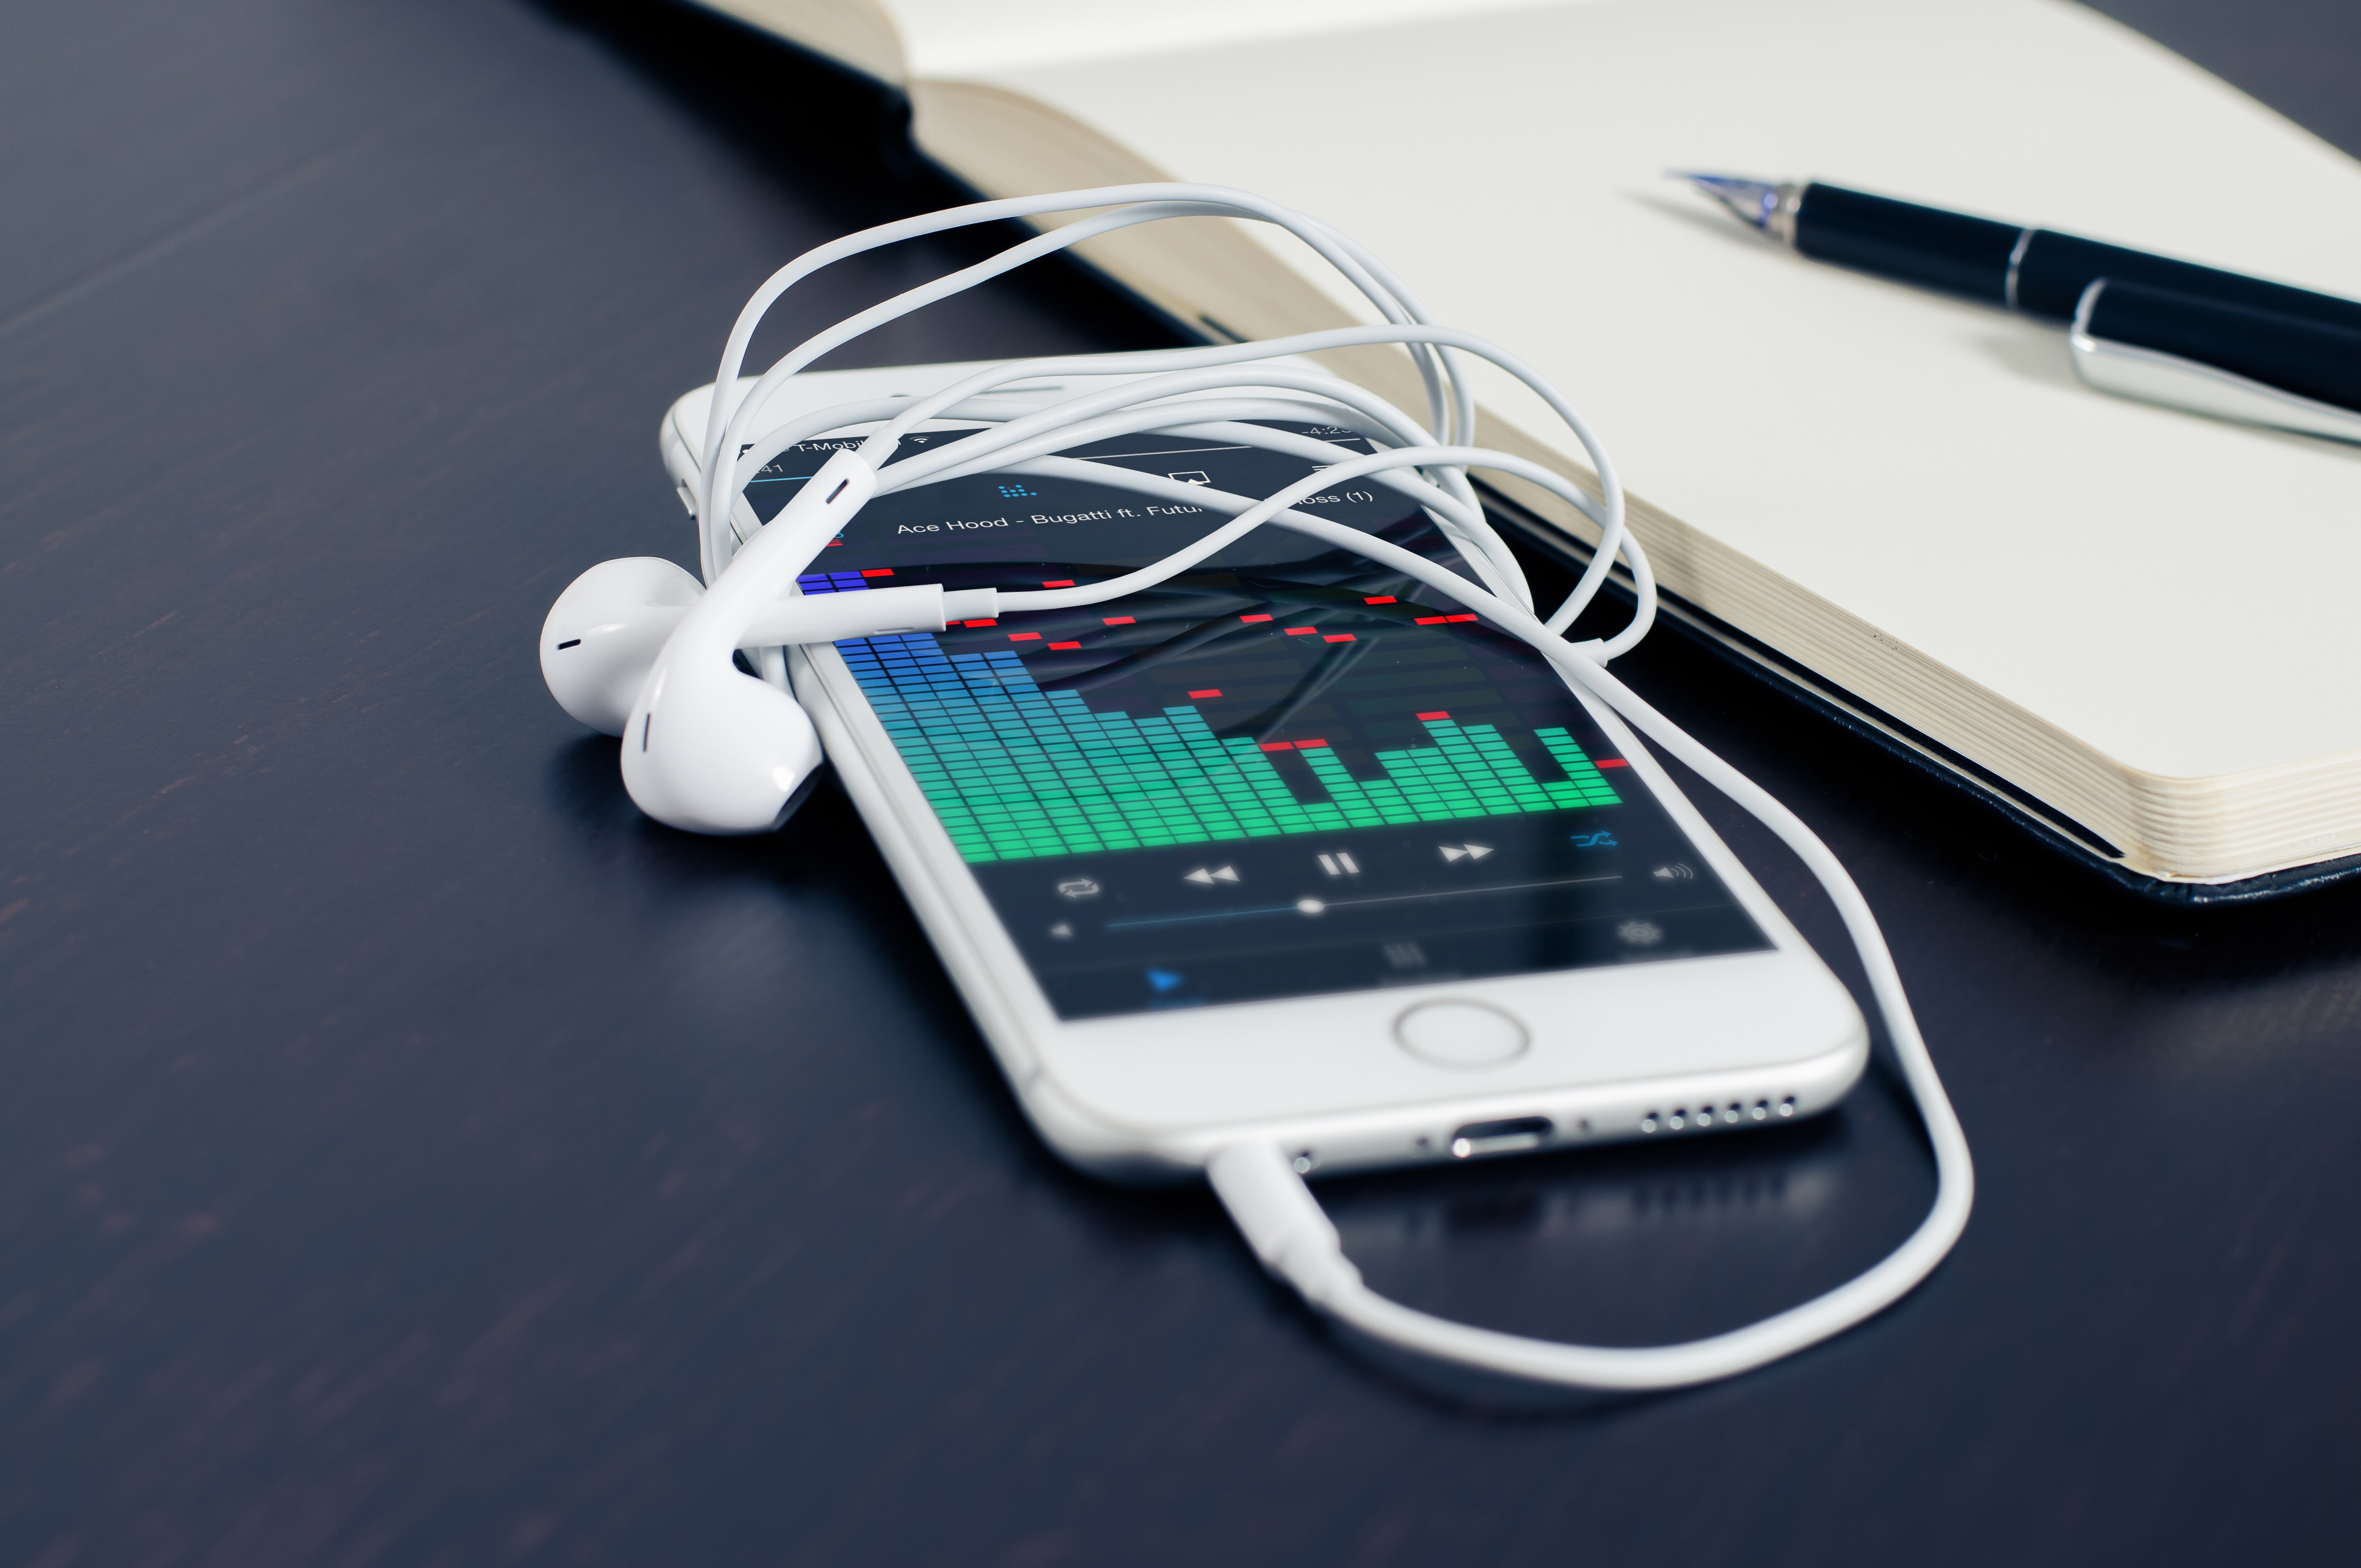 Apps that download music to your phone for free download